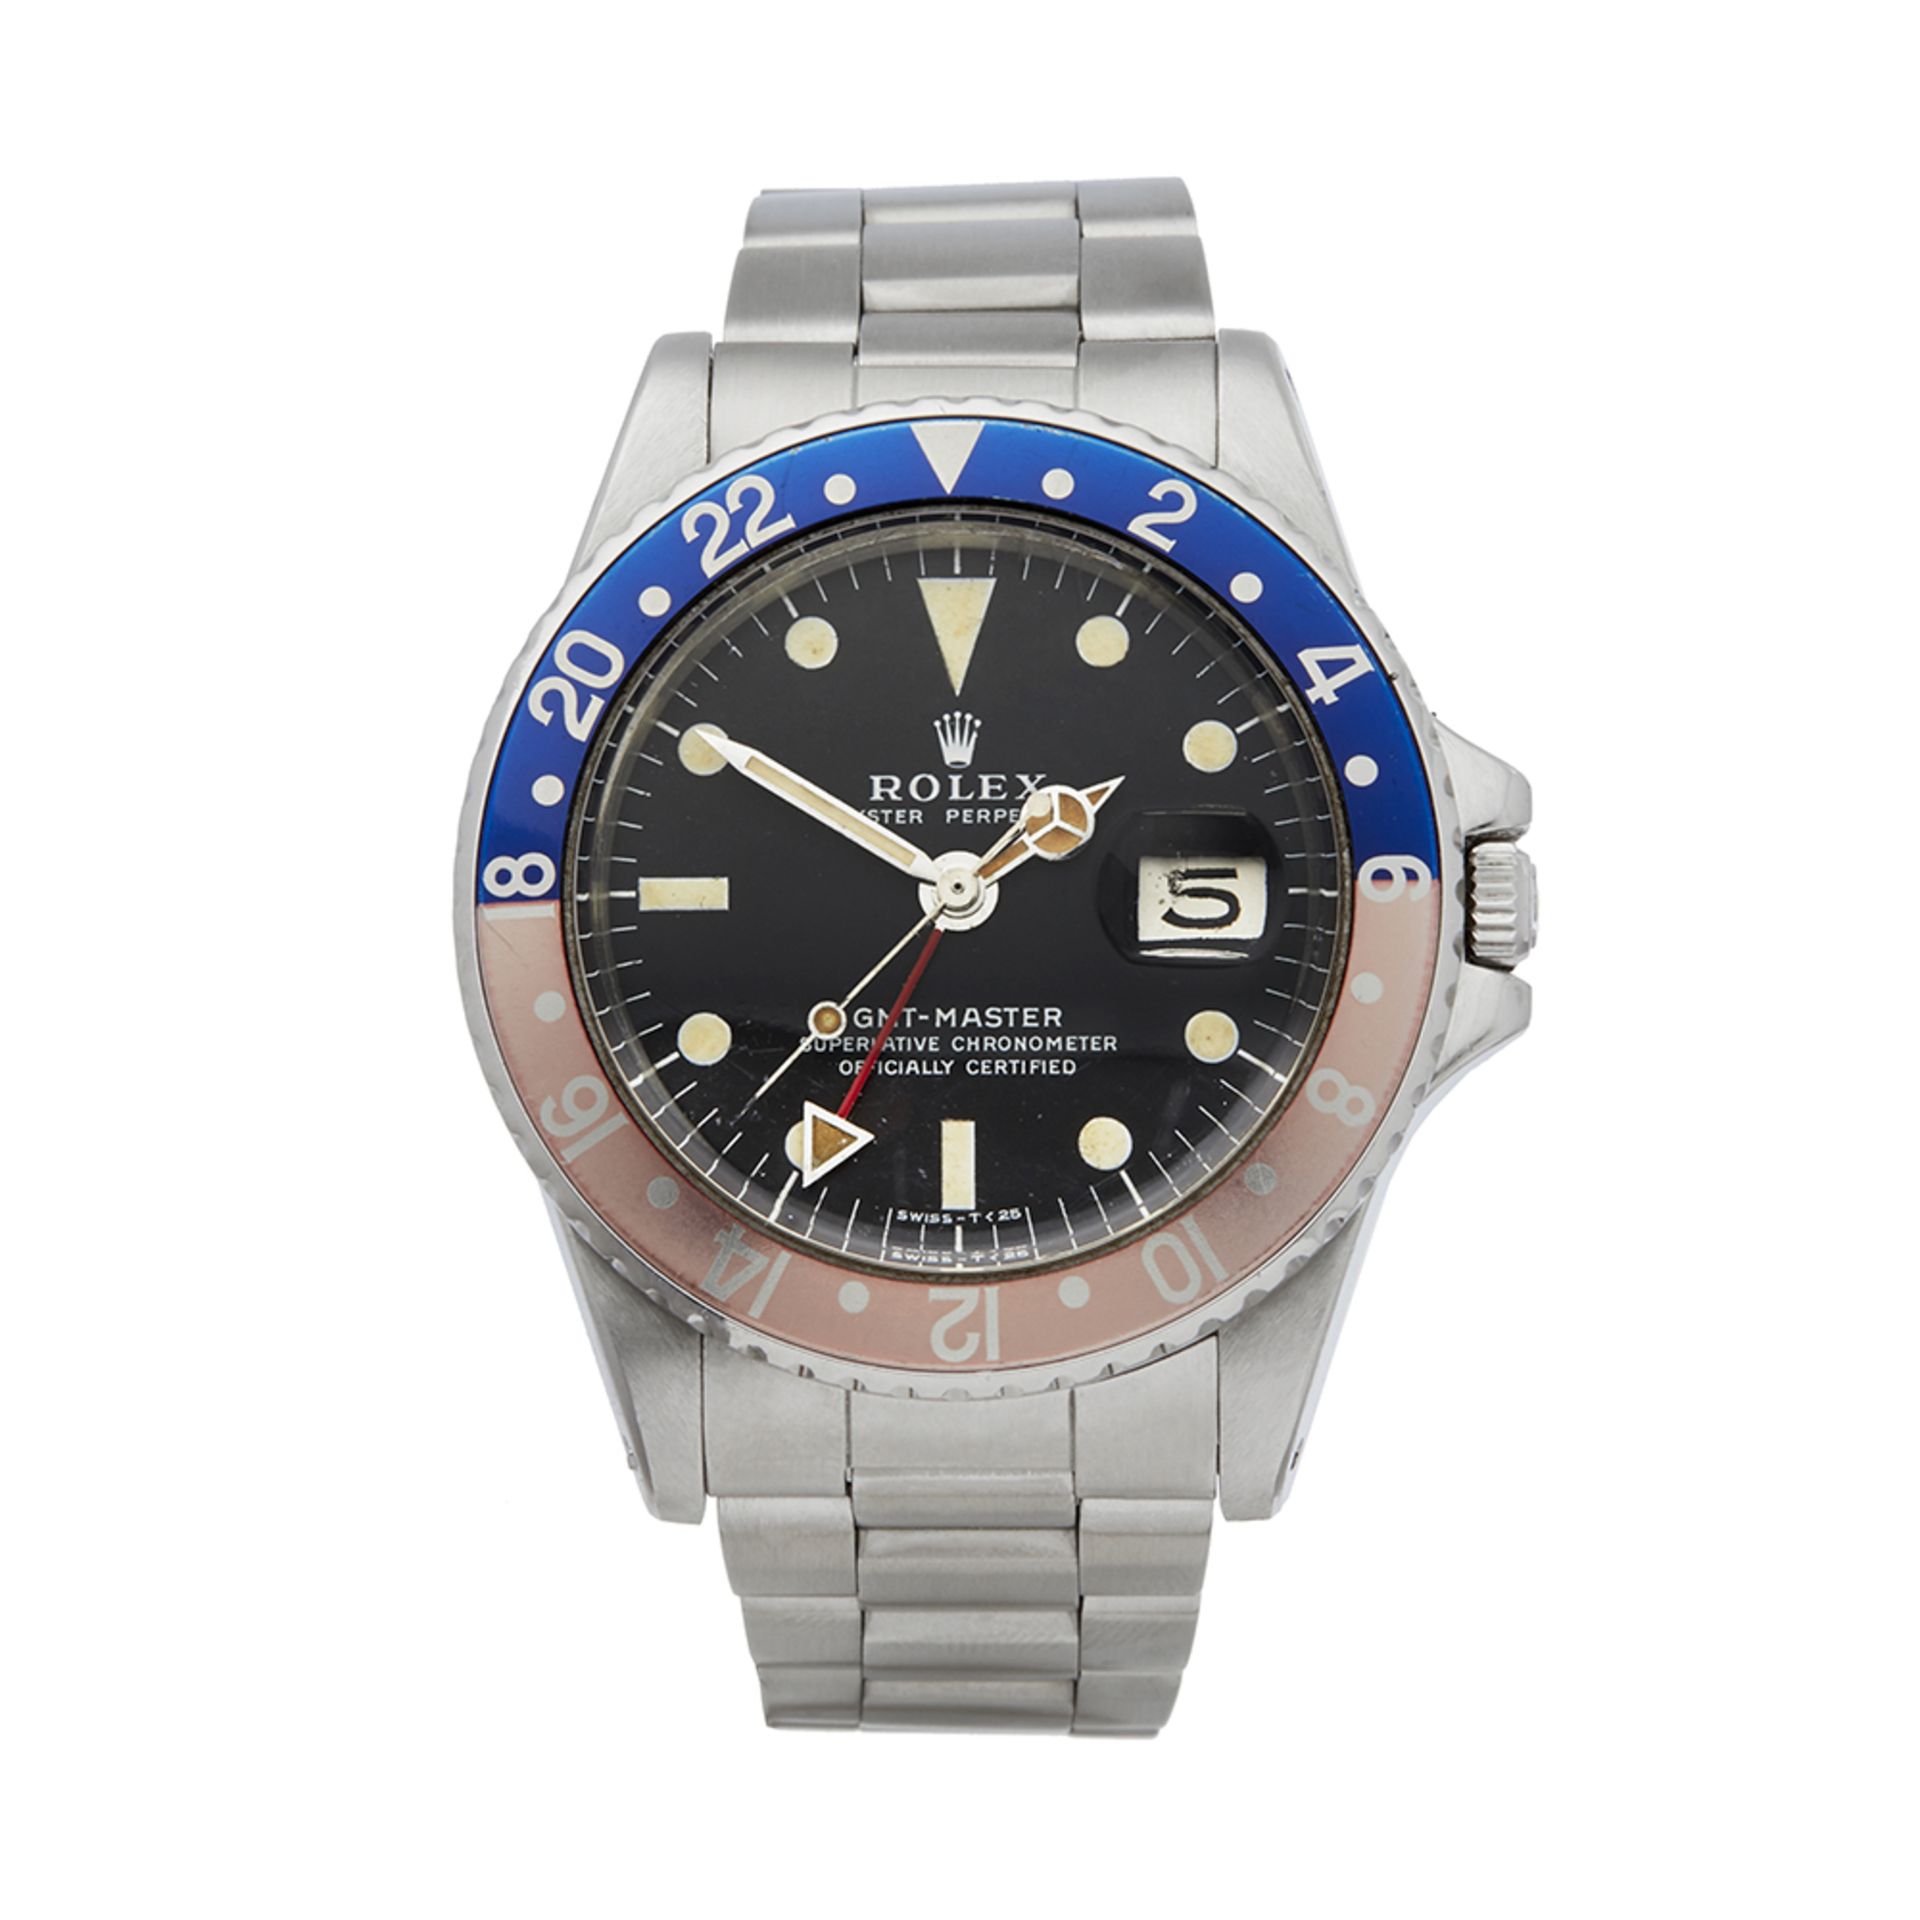 GMT-Master Radial Dial Stainless Steel - 1675 - Image 2 of 6